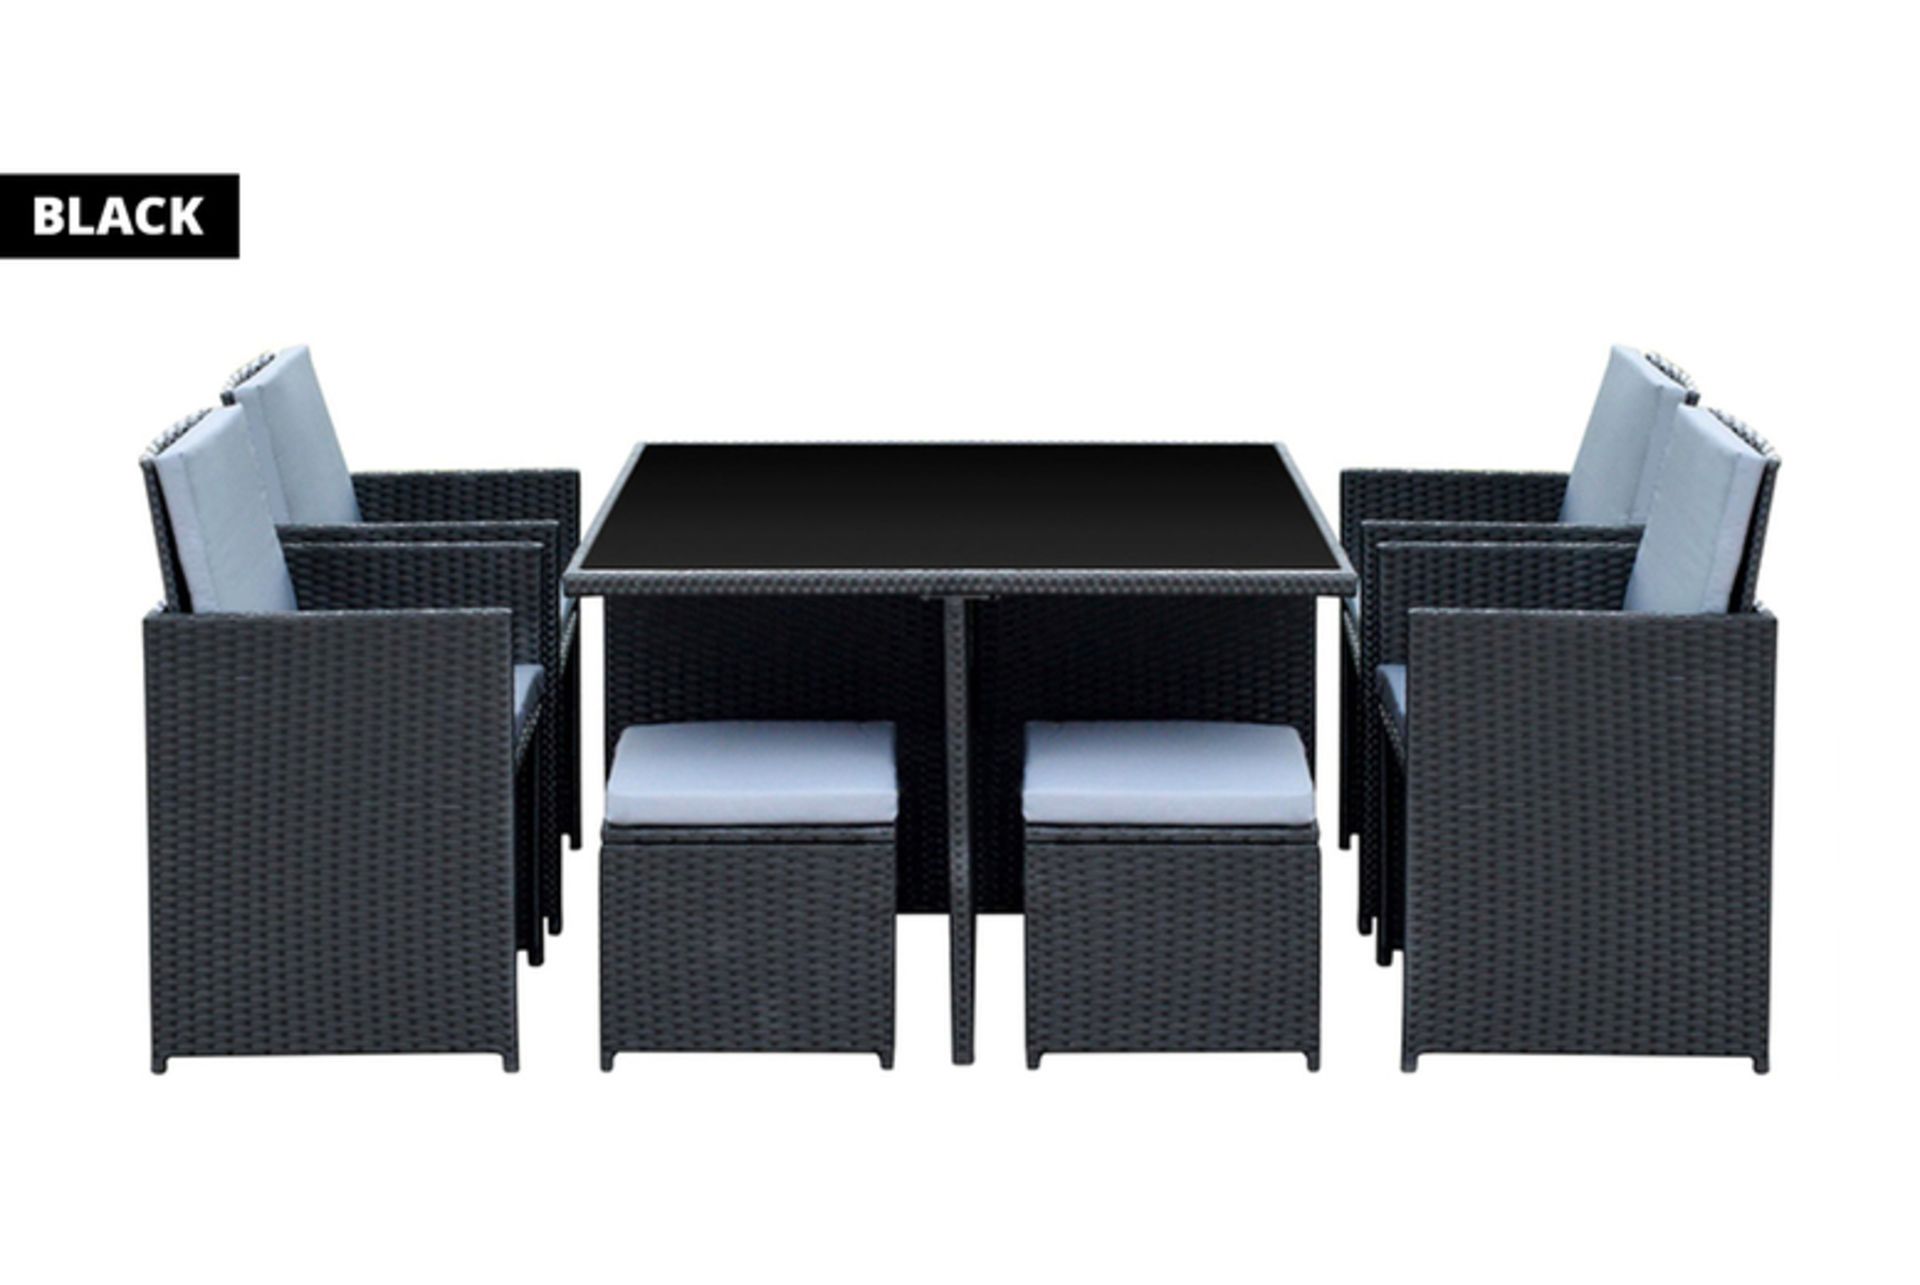 8-Seater Monument Rattan Cube Garden Furniture Dining Set - Black - Image 3 of 4